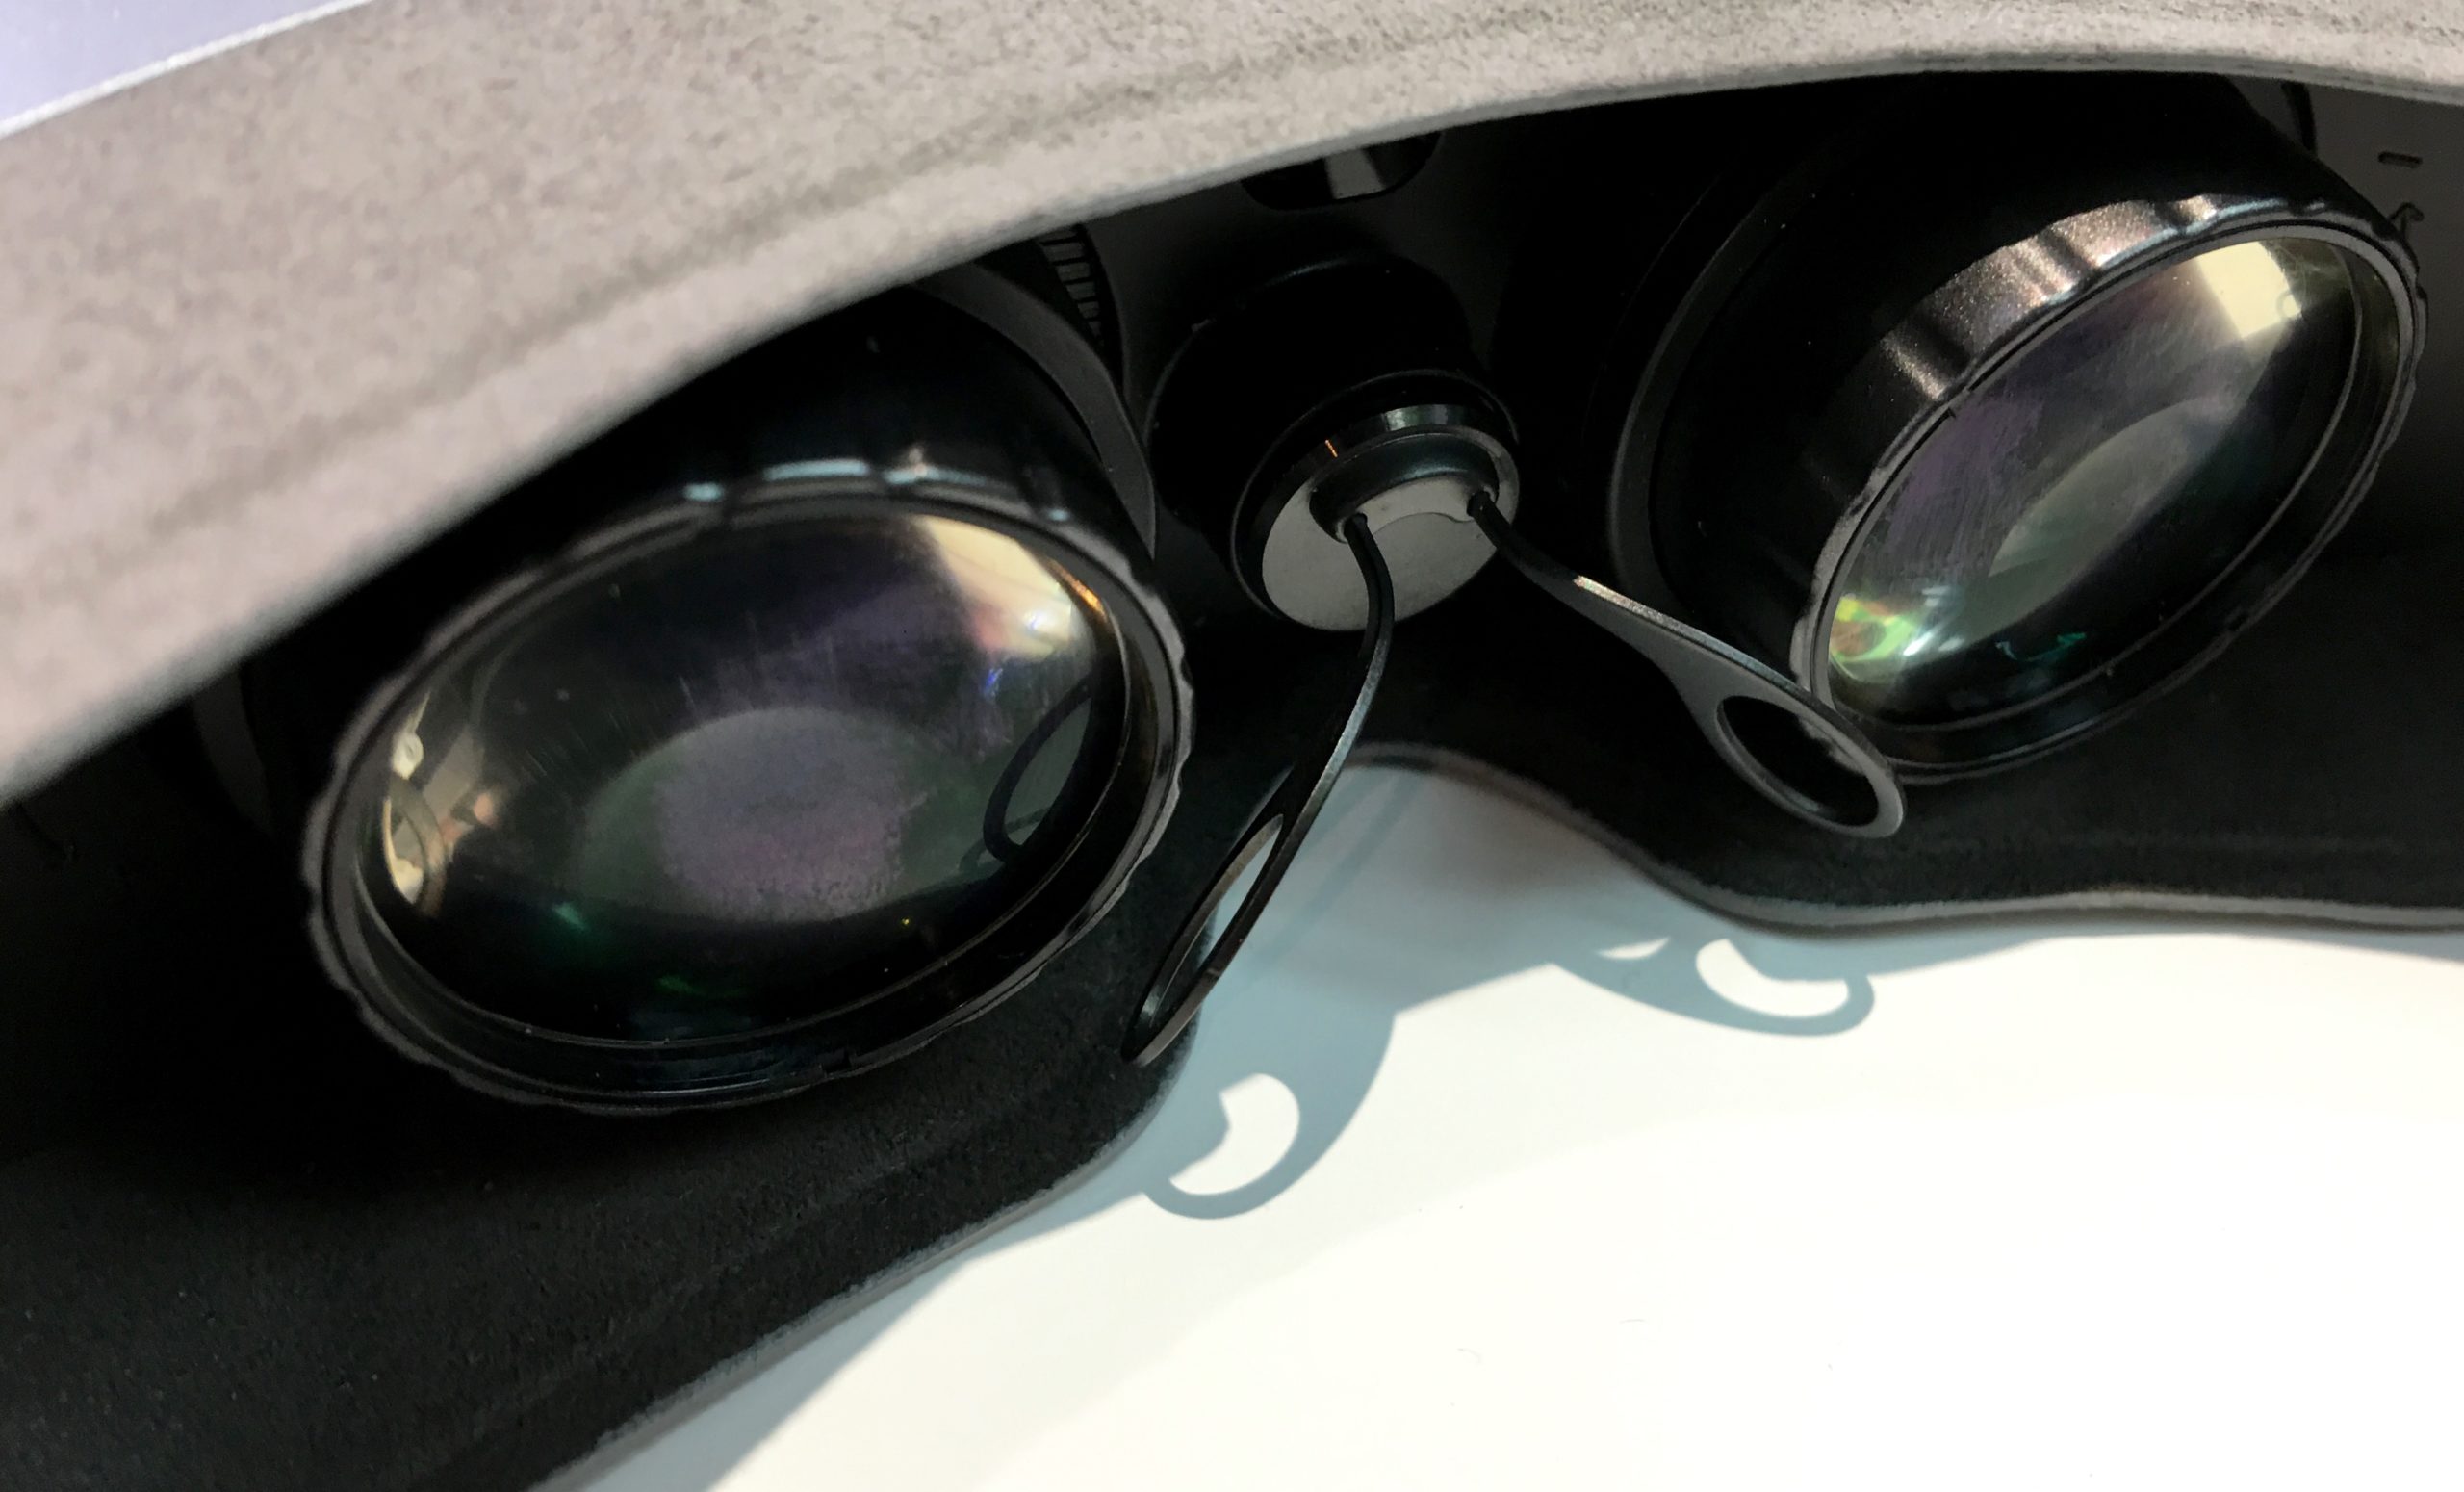 LG 360 VR Is One Of The Worst Virtual Reality Headsets I’ve Ever Tried